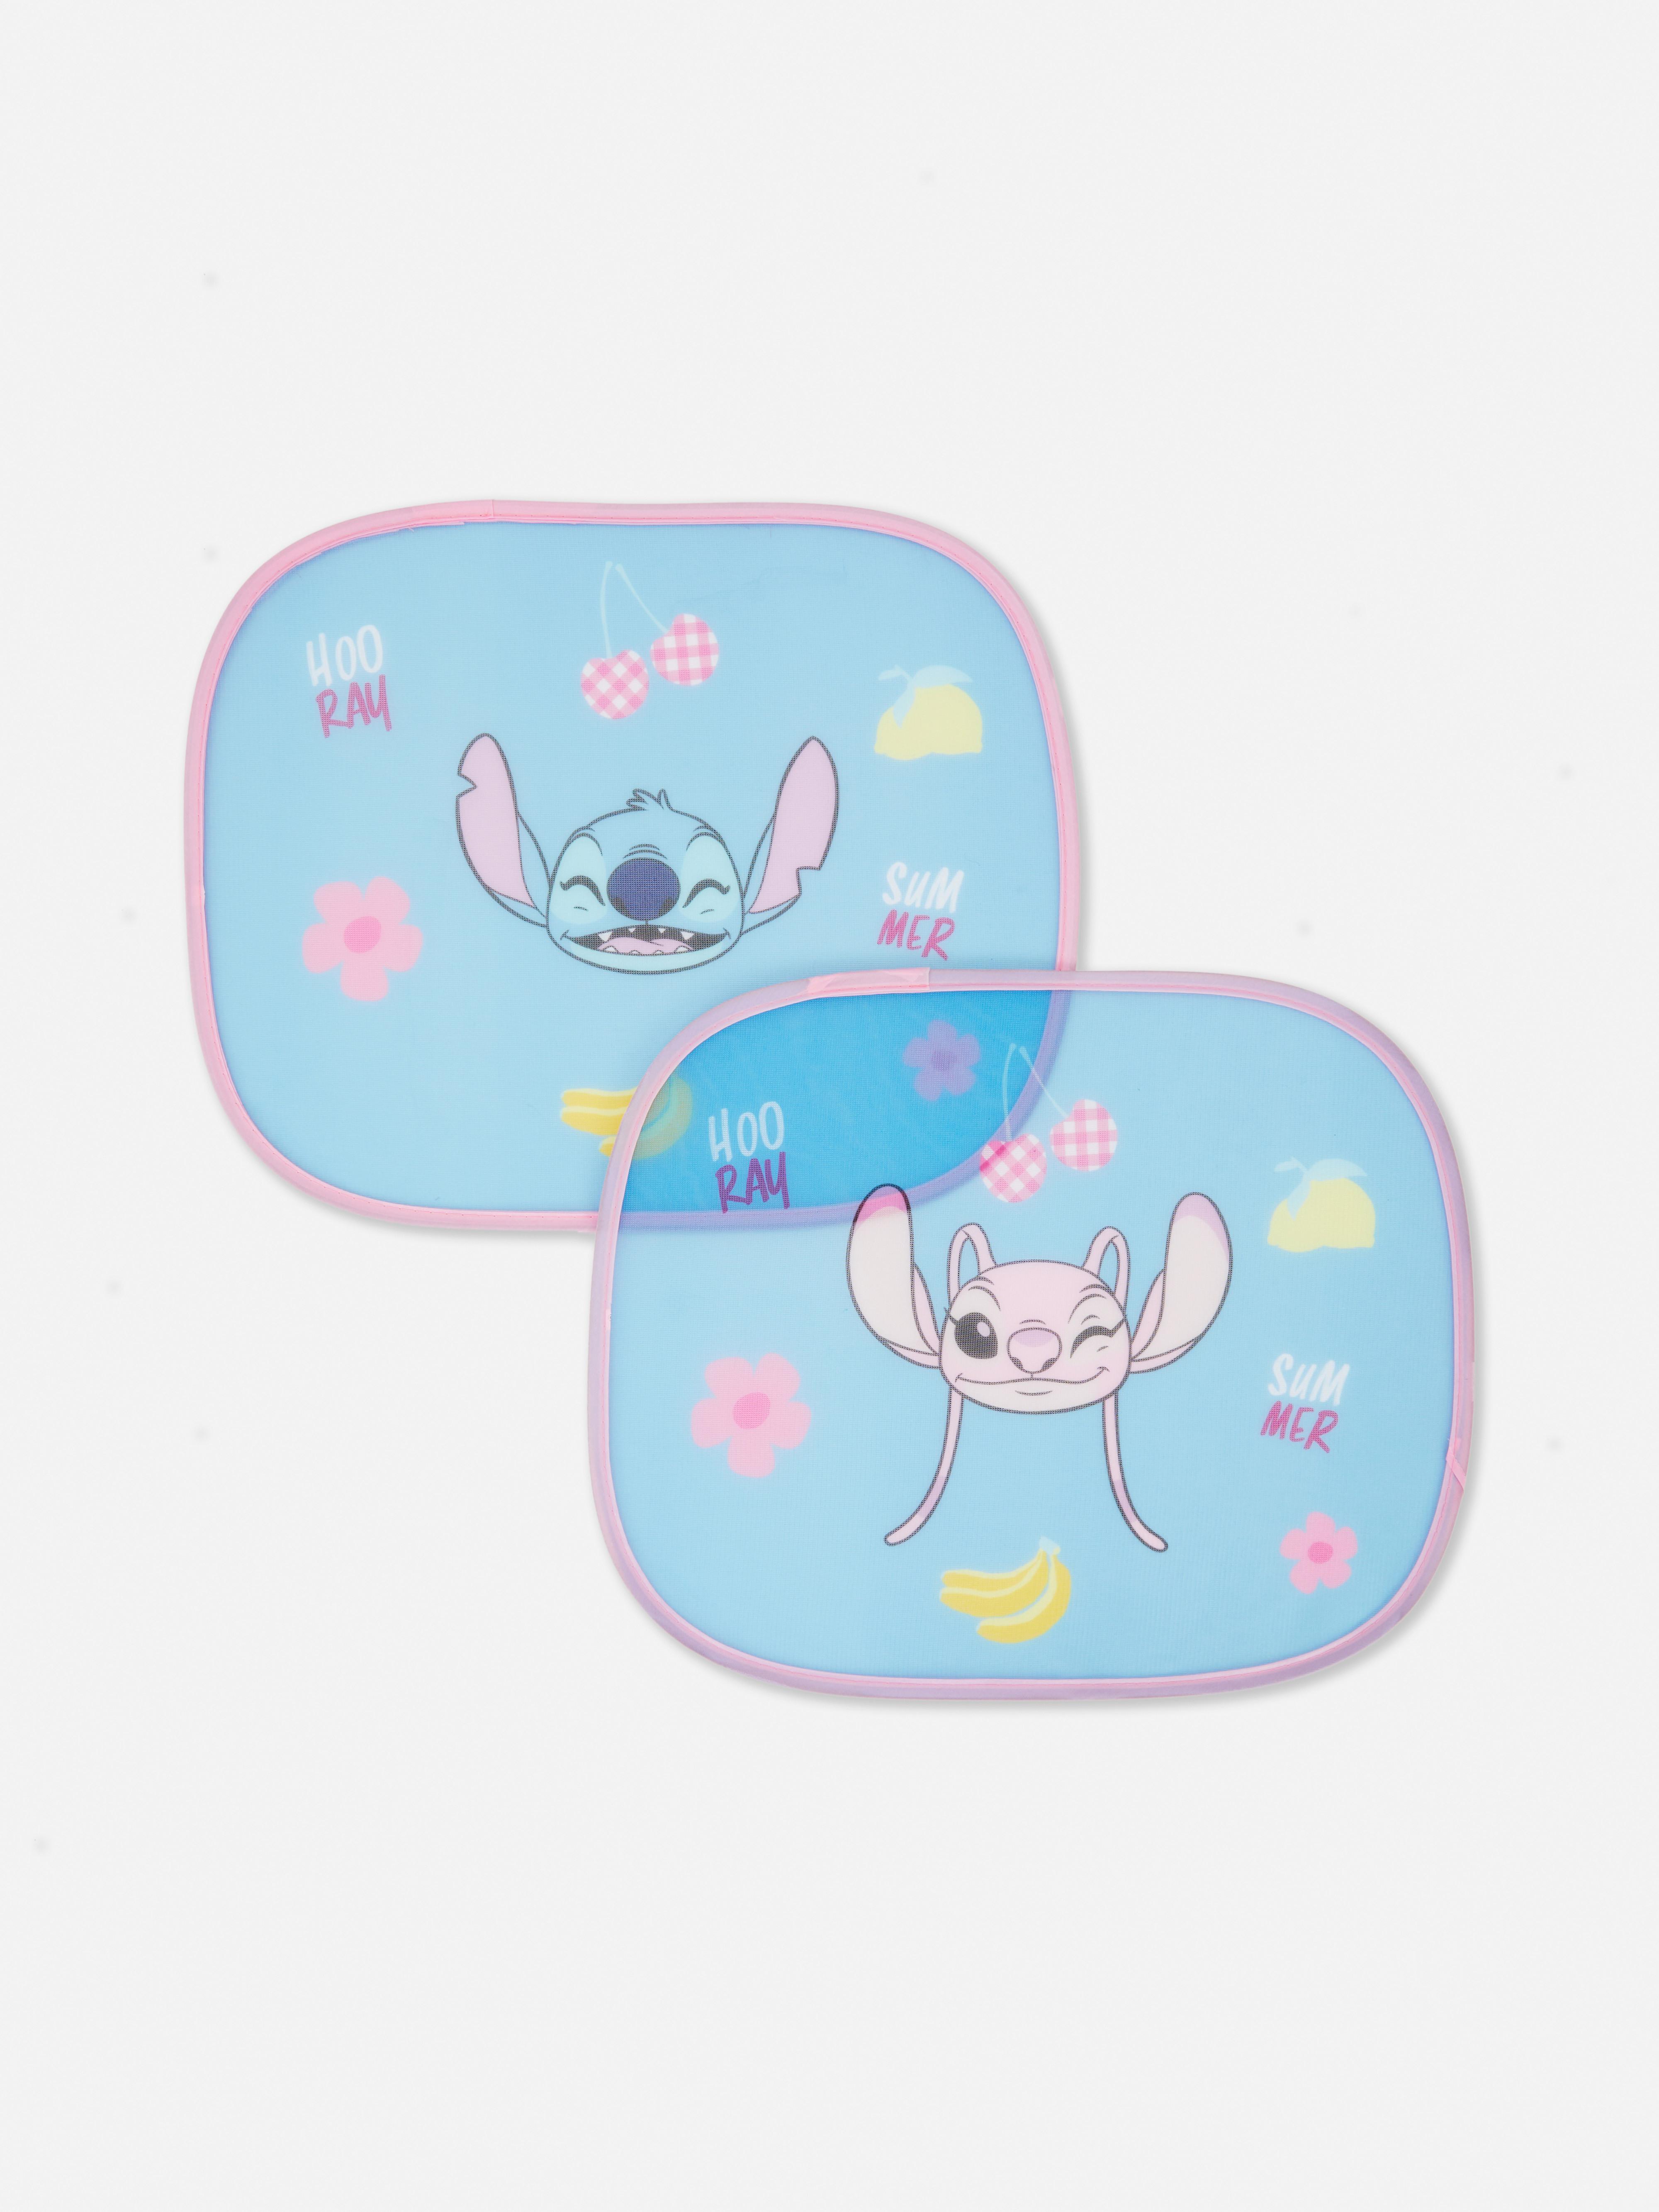 Disney Stitch Collection  Lilo & Stitch Clothing and Accessories